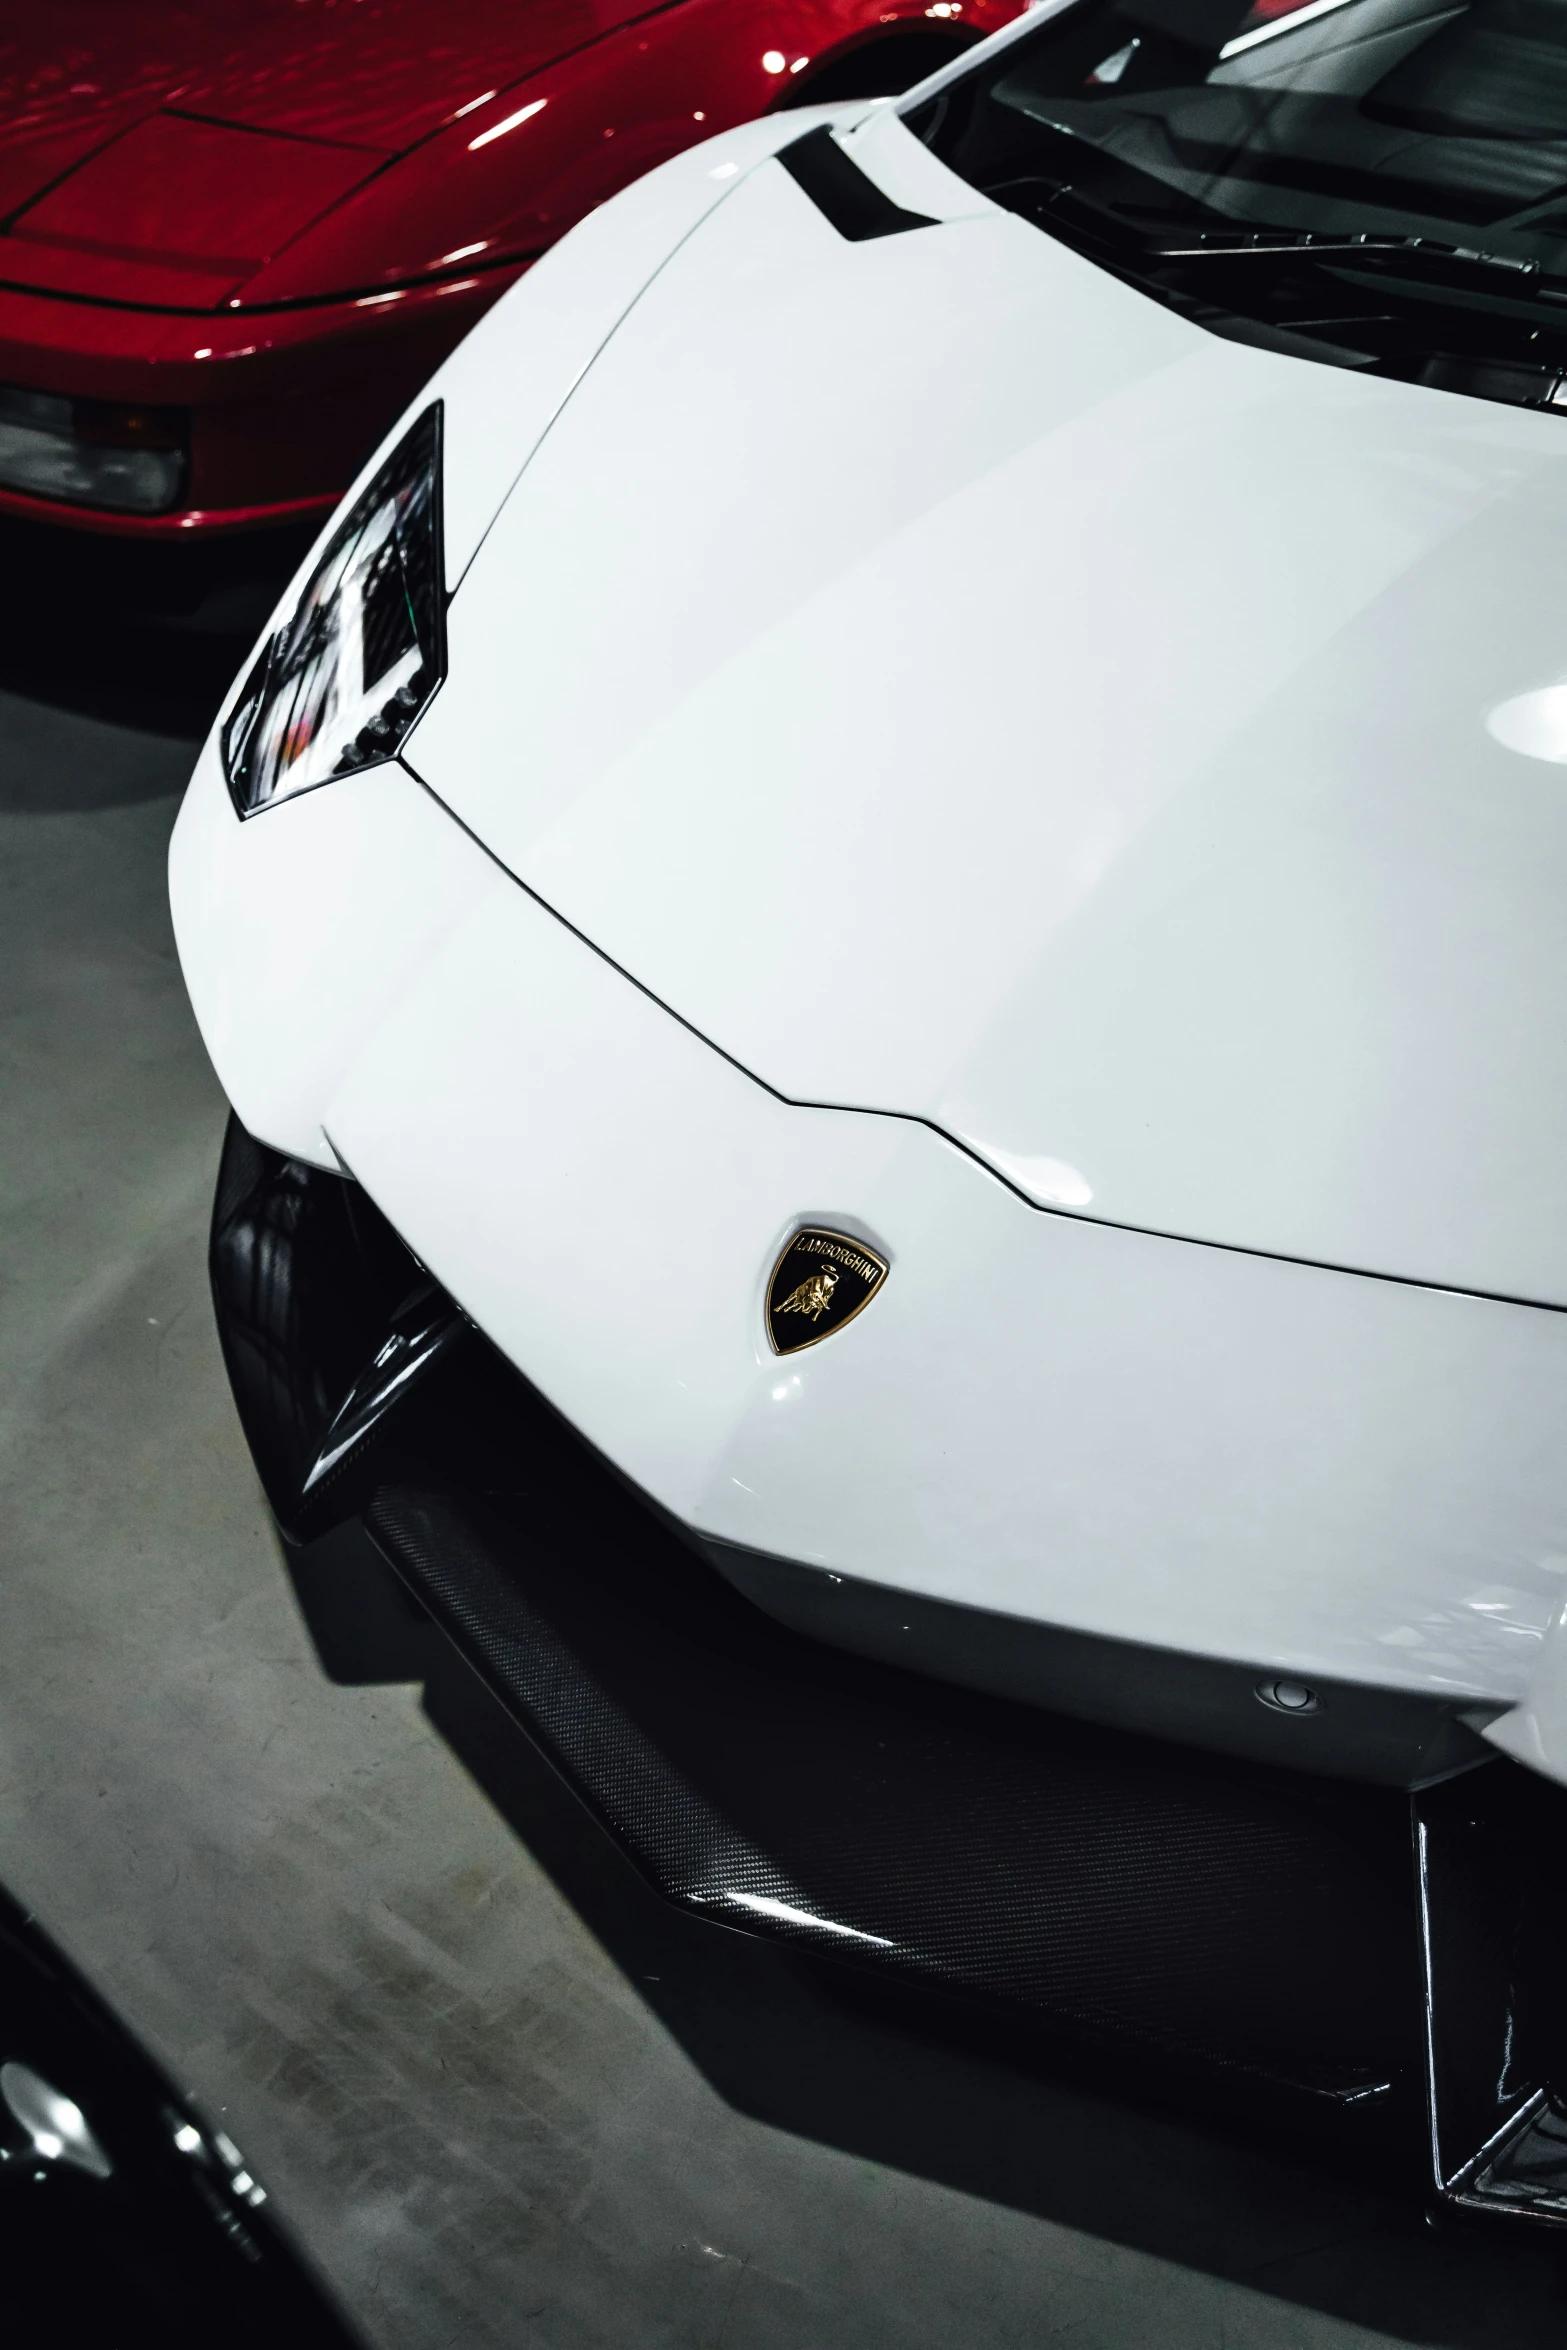 the front view of a white sports car